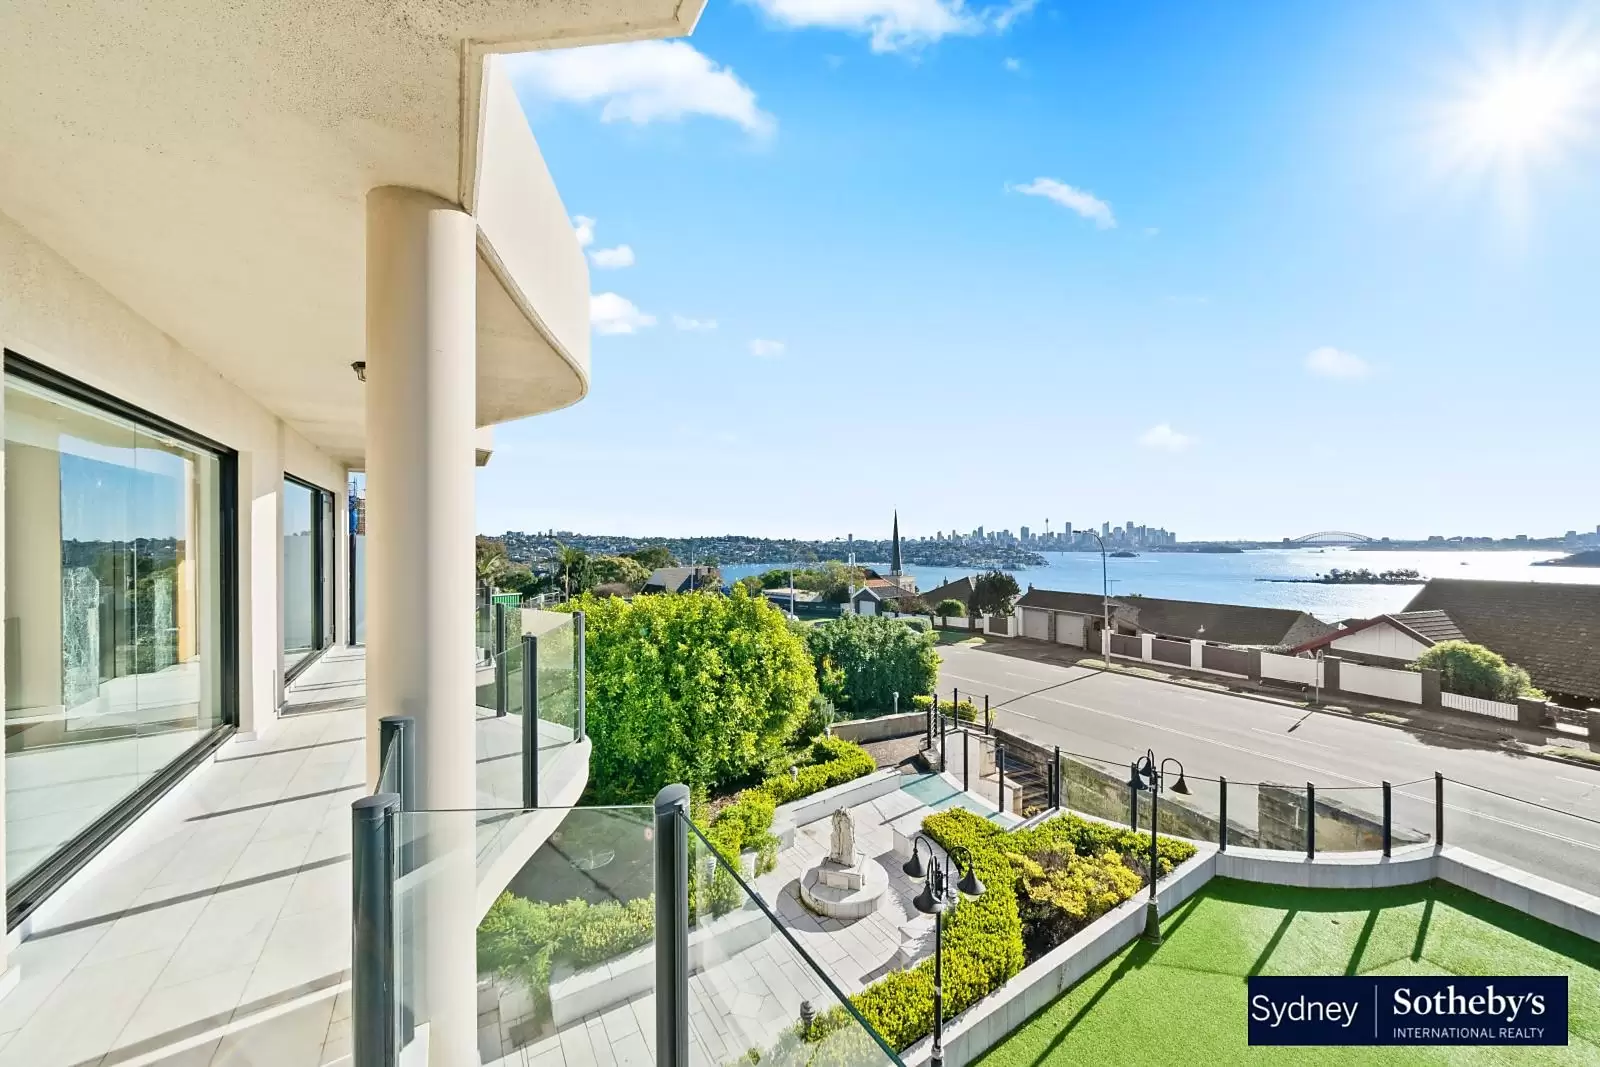 31a New South Head Road, Vaucluse Leased by Sydney Sotheby's International Realty - image 5